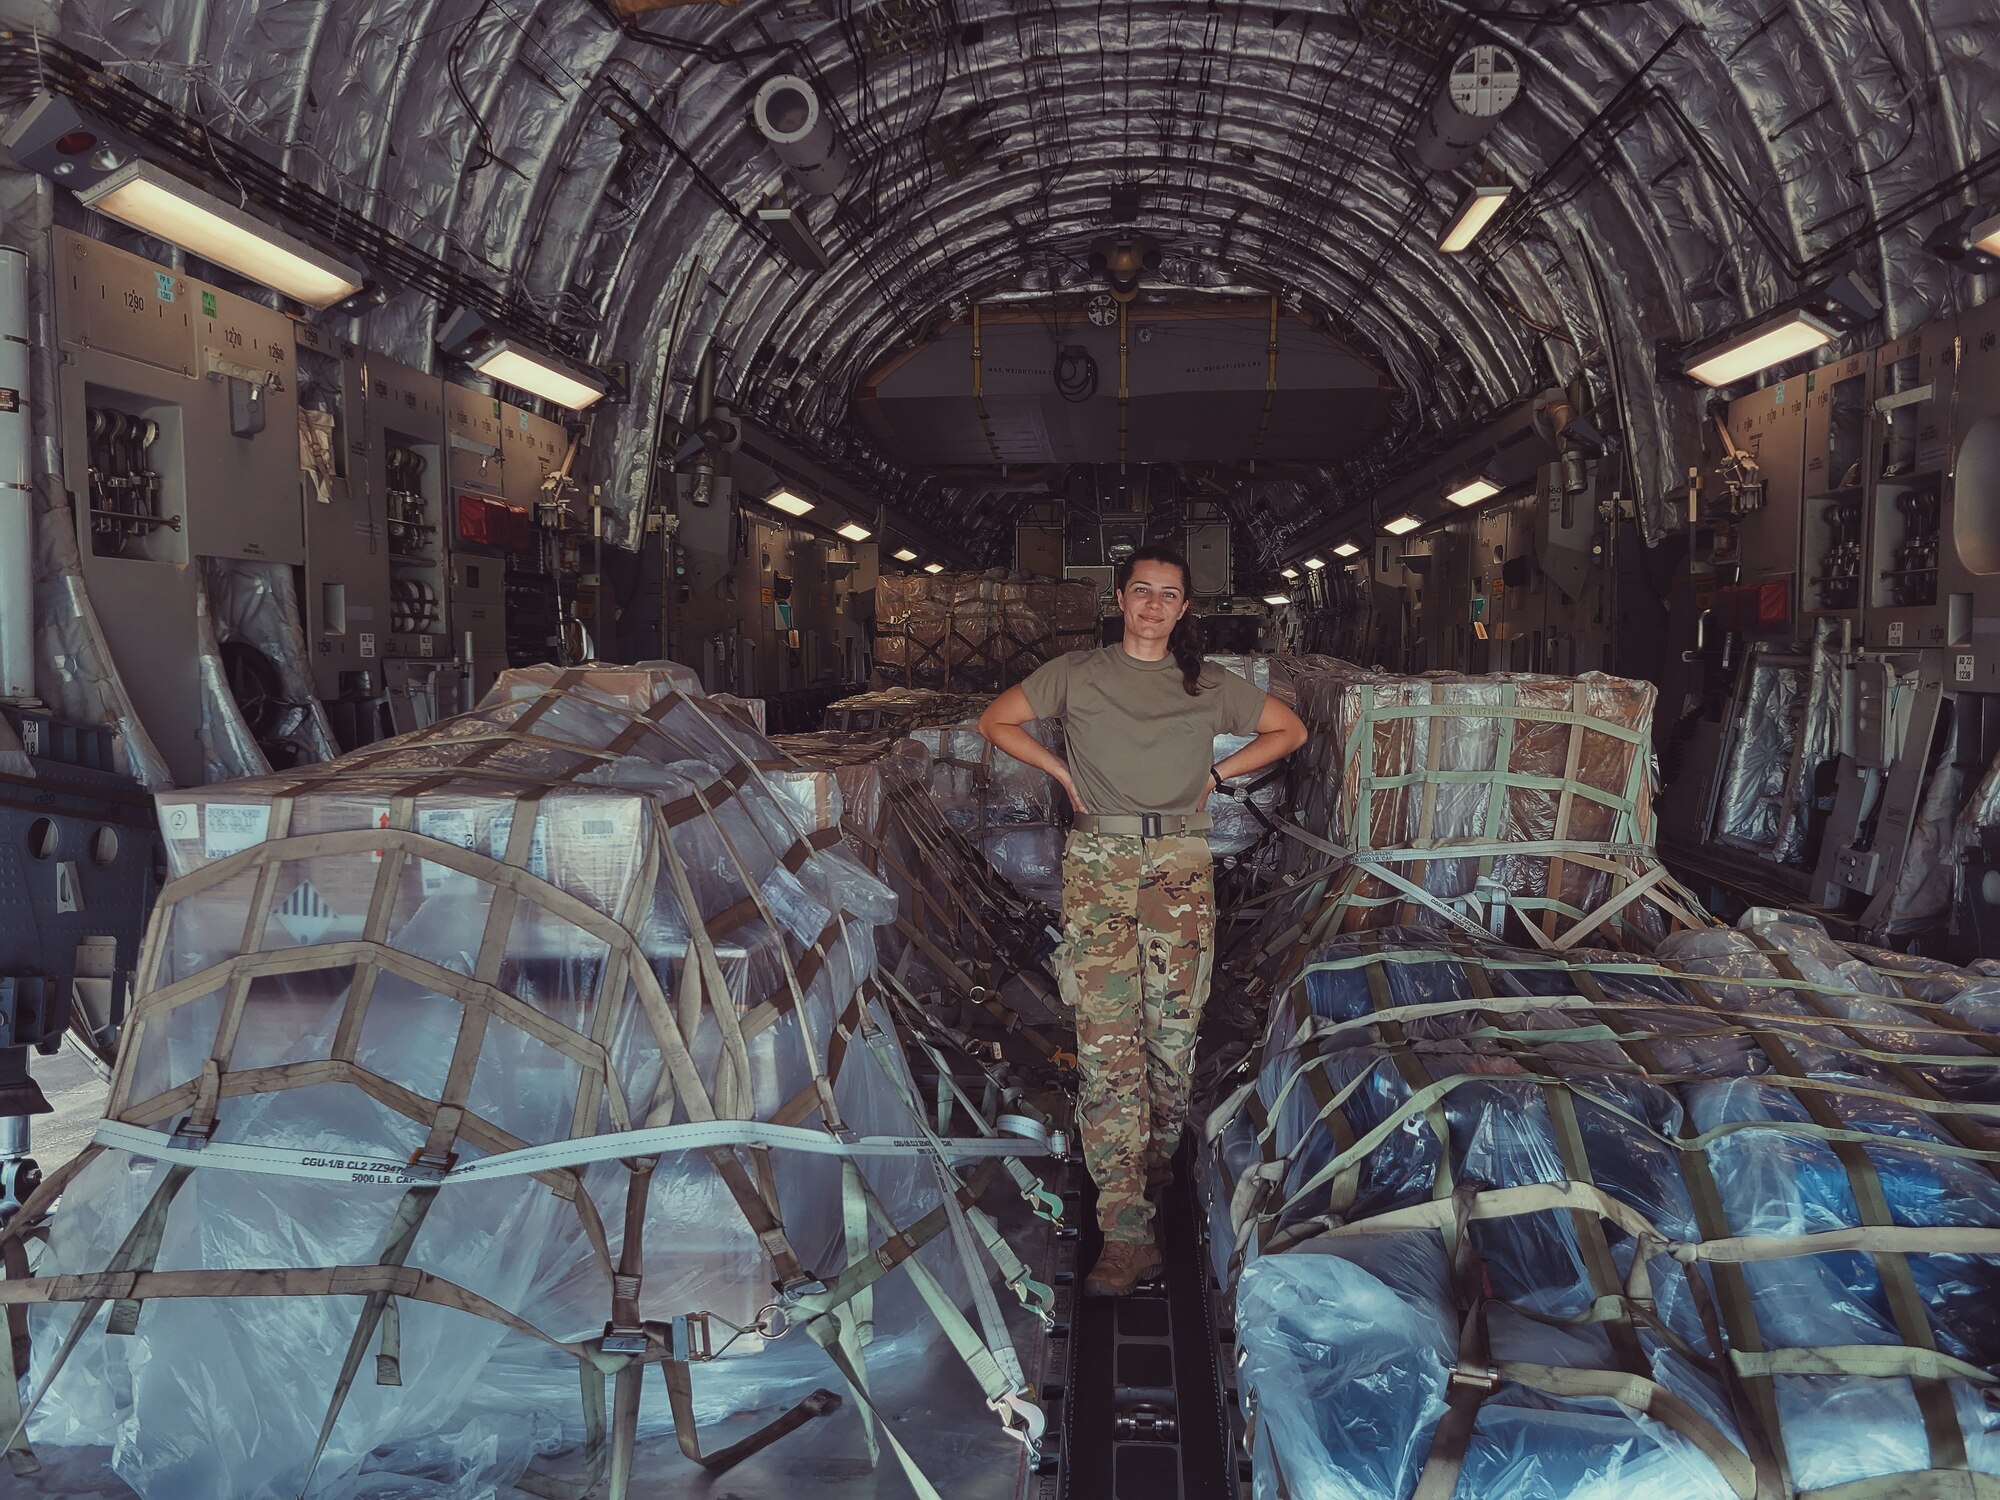 U.S. Air Force Airman 1st Class Elisabeth Wright, poses in front of cargo strapped inside of a C-17 Globemaster III at Joint Base Elmendorf-Richardson.